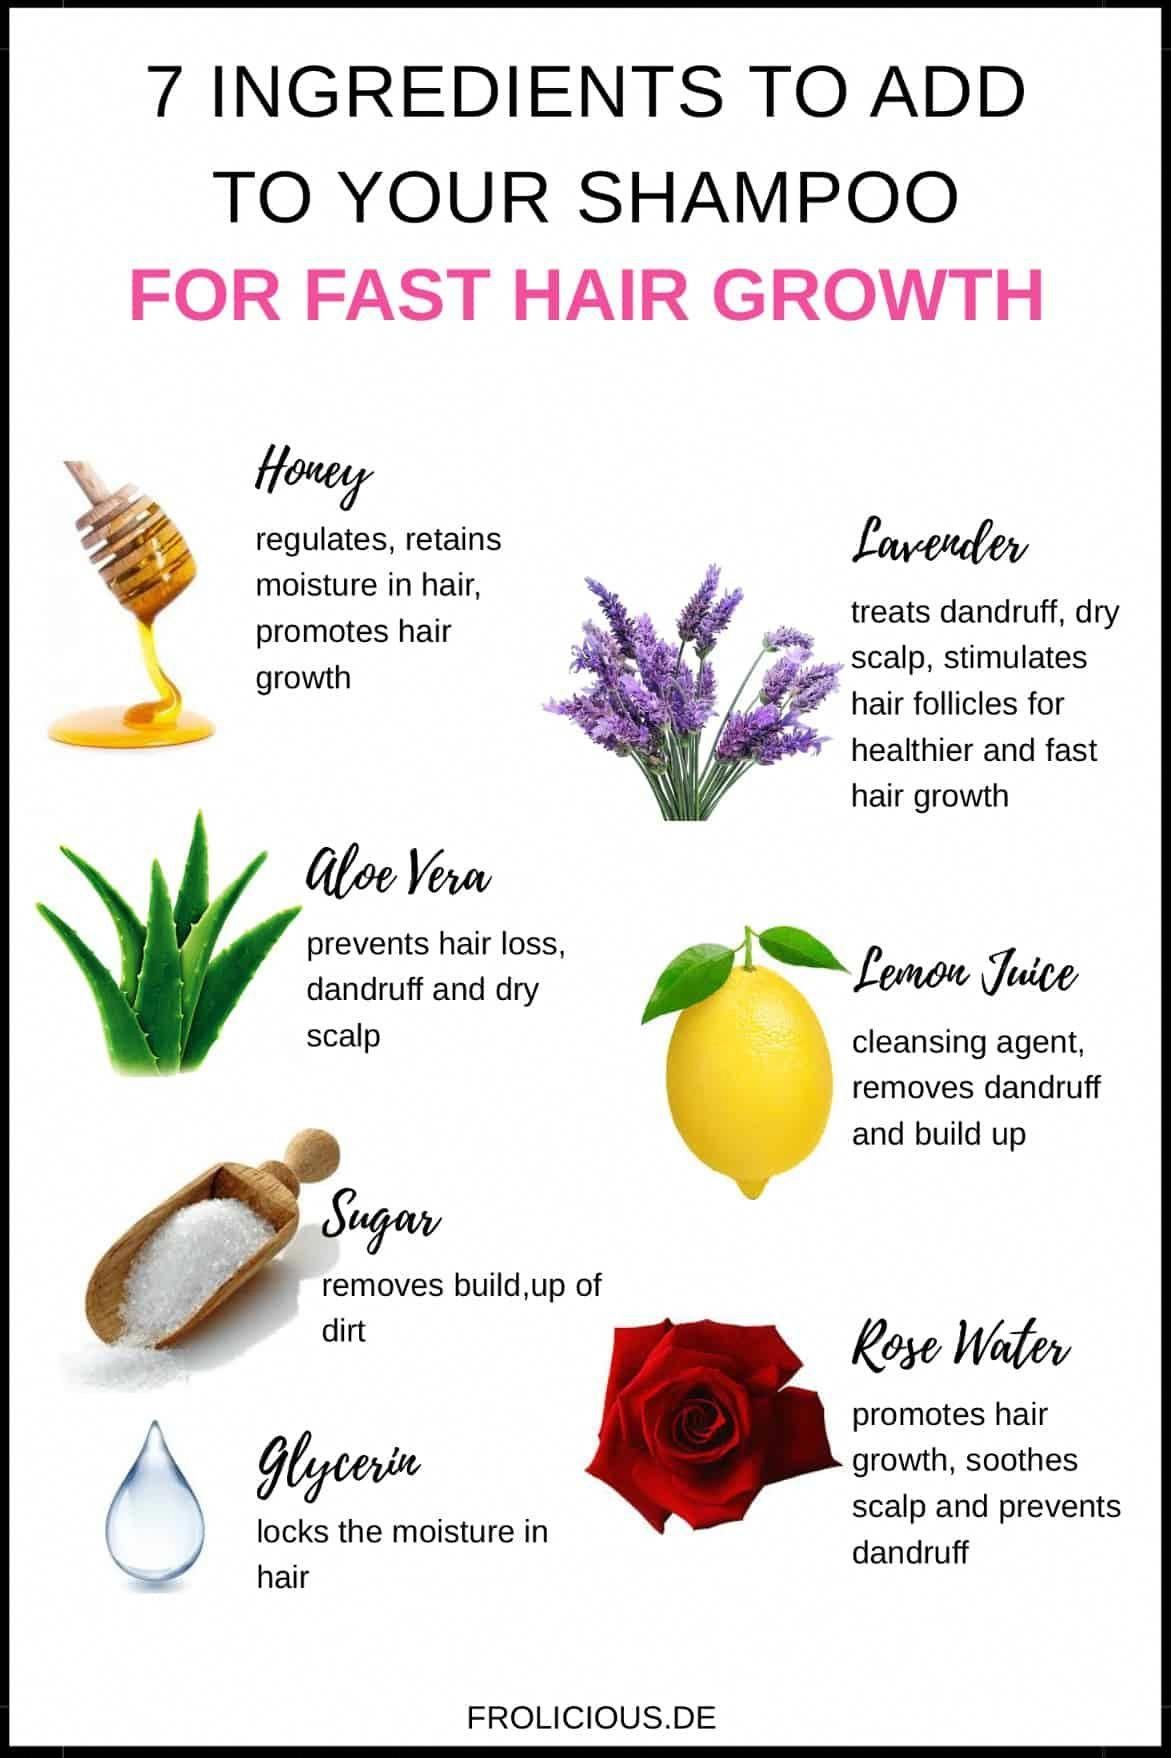 7 Ingredients You Should Add To Your Shampoo For Fast Hair Growth -   11 hair Growth hairstyles ideas